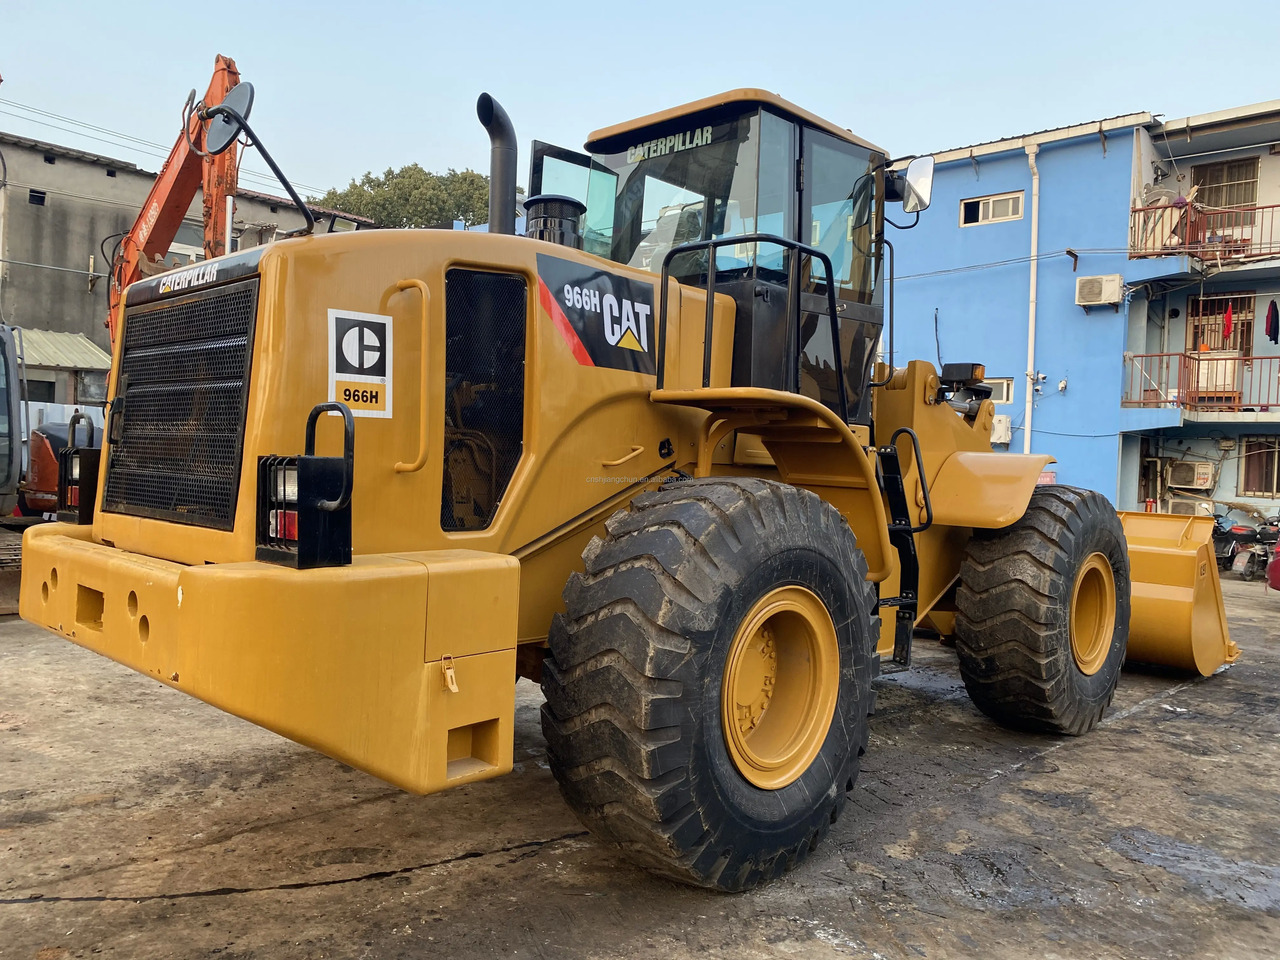 Wheel loader Secondhand Japanese Cat966H Used Wheel Loaders Cheap Price Wheel Loader 966H second-hand construction machinery